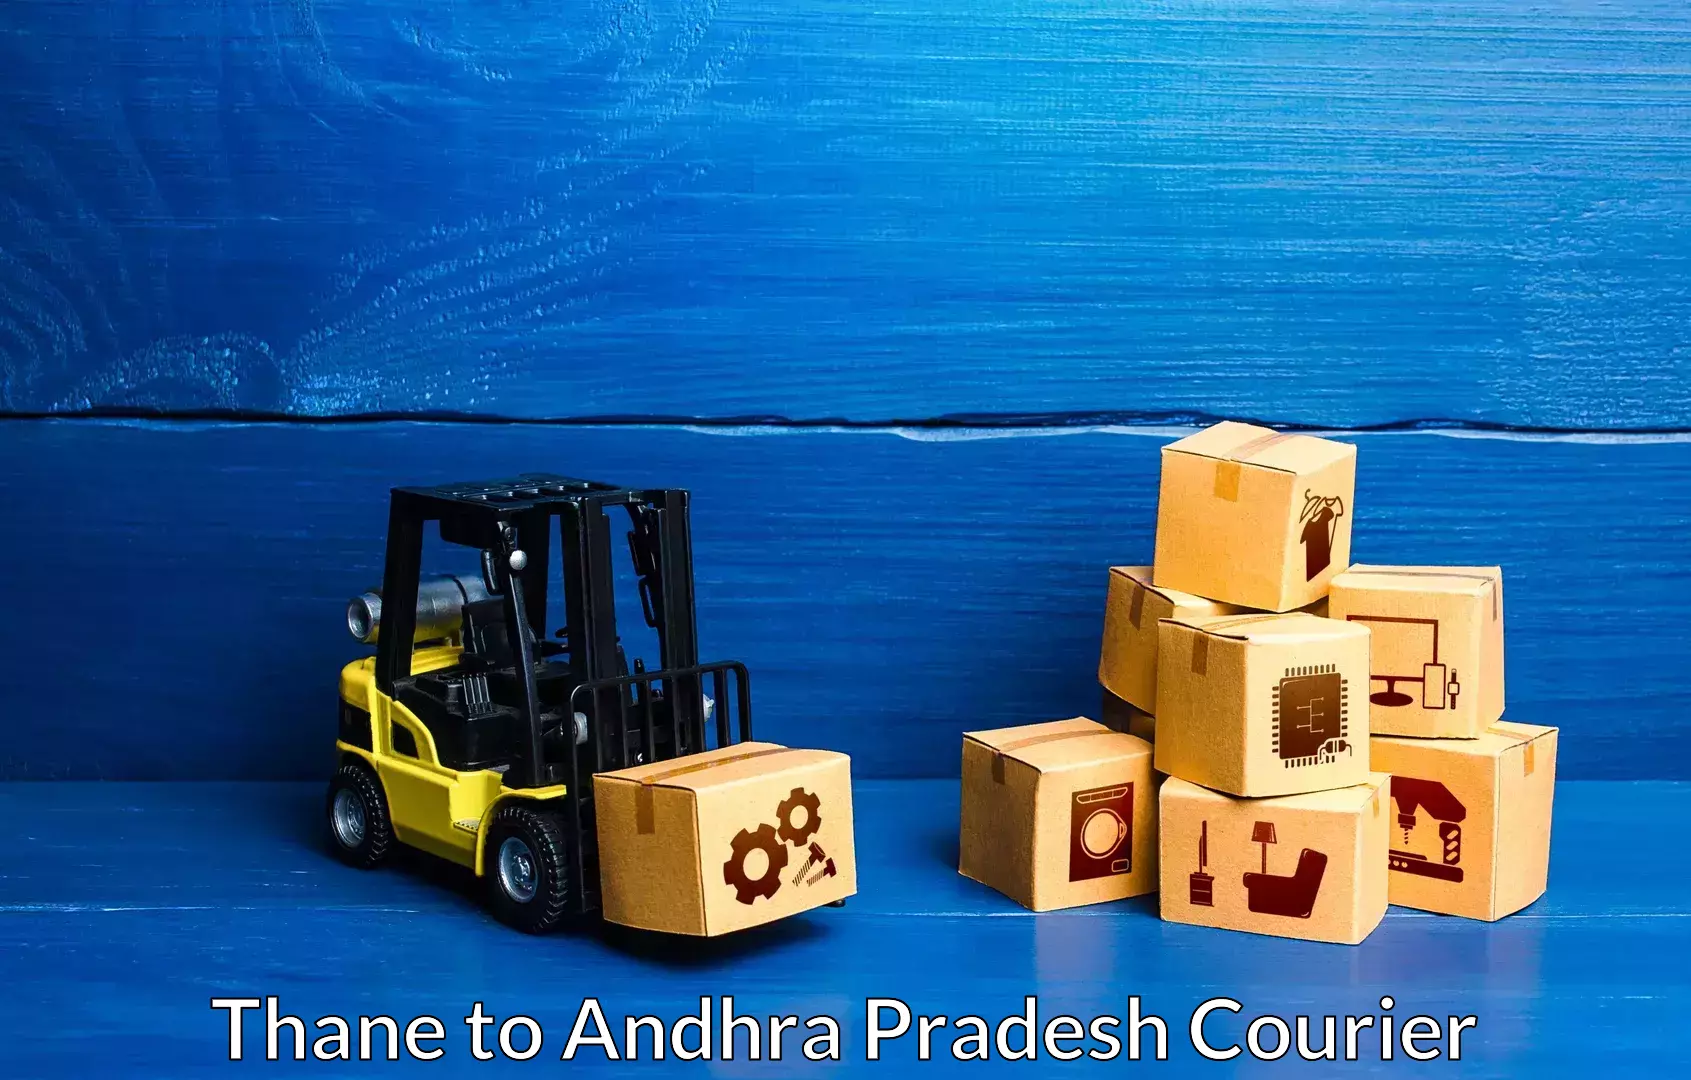 Furniture delivery service Thane to Chirala